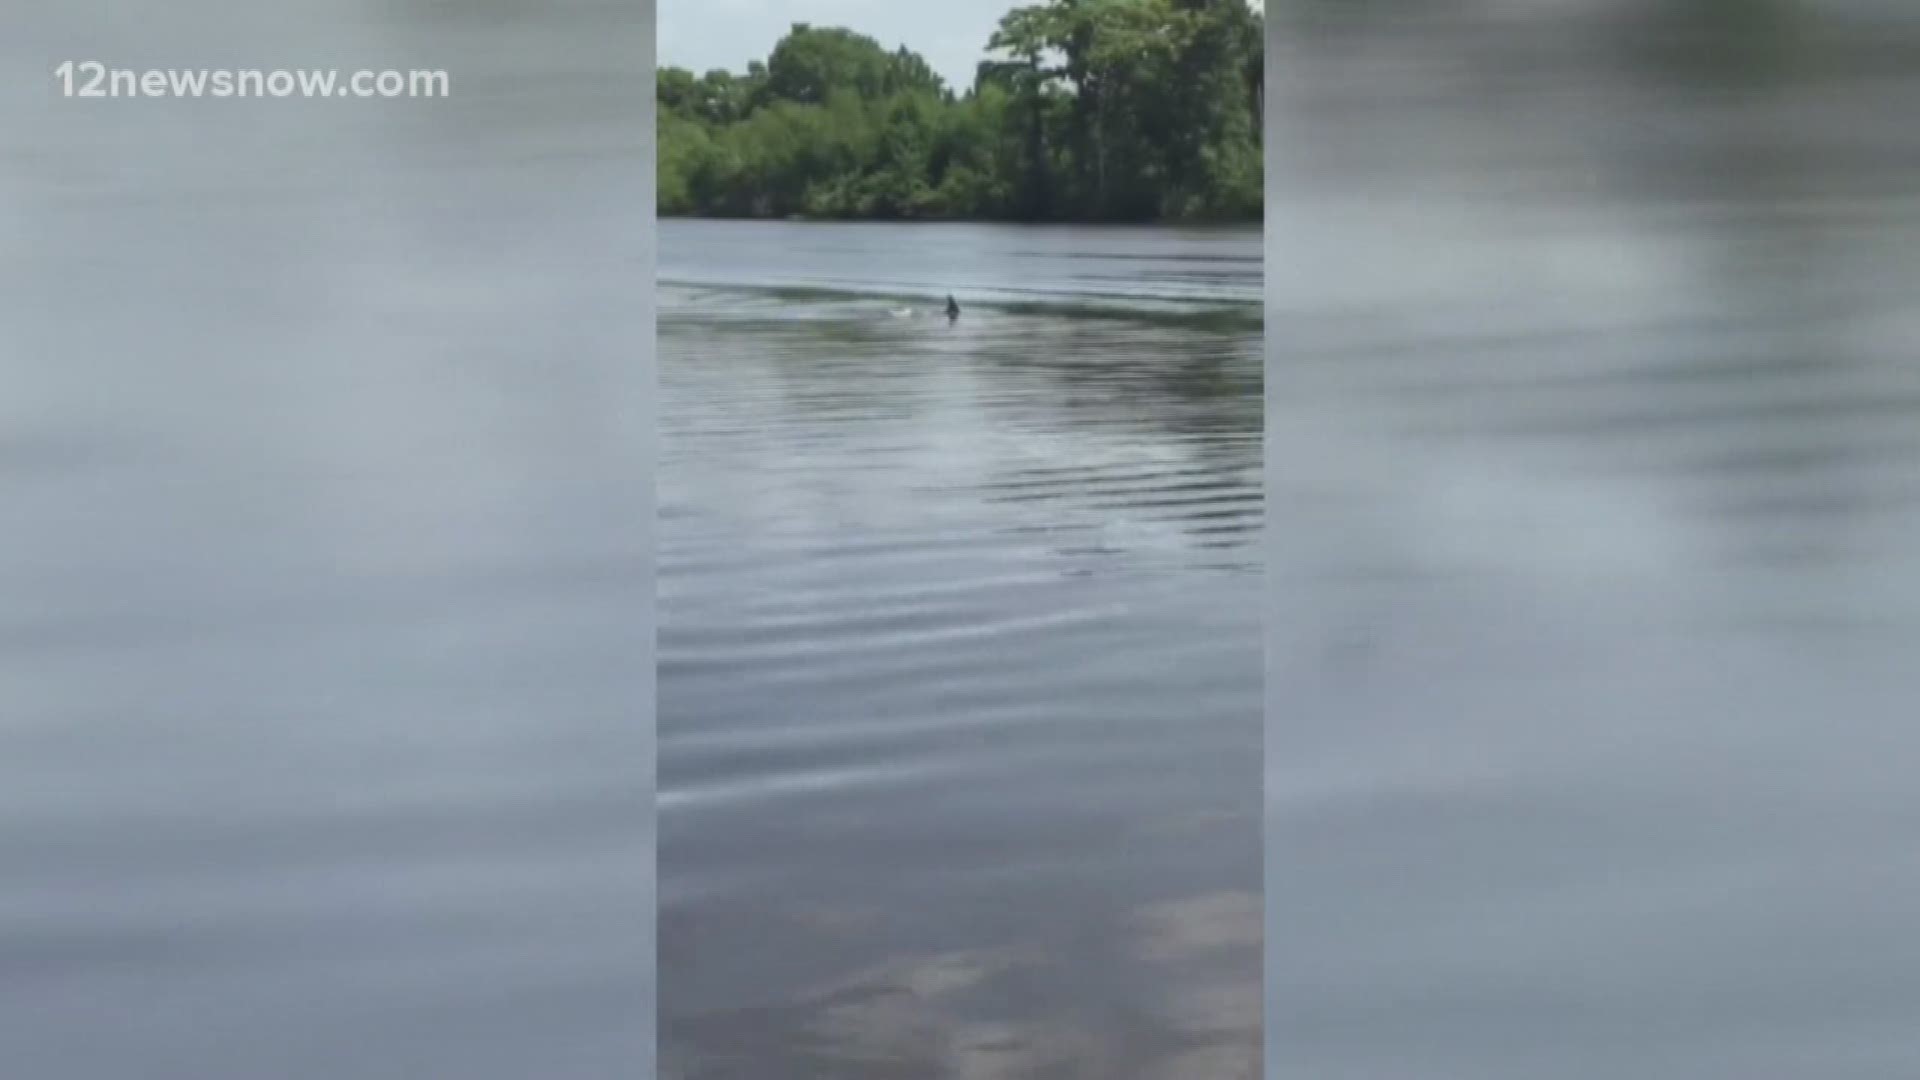 Southeast Texas family spots small pod of dolphins along Neches River in Beaumont